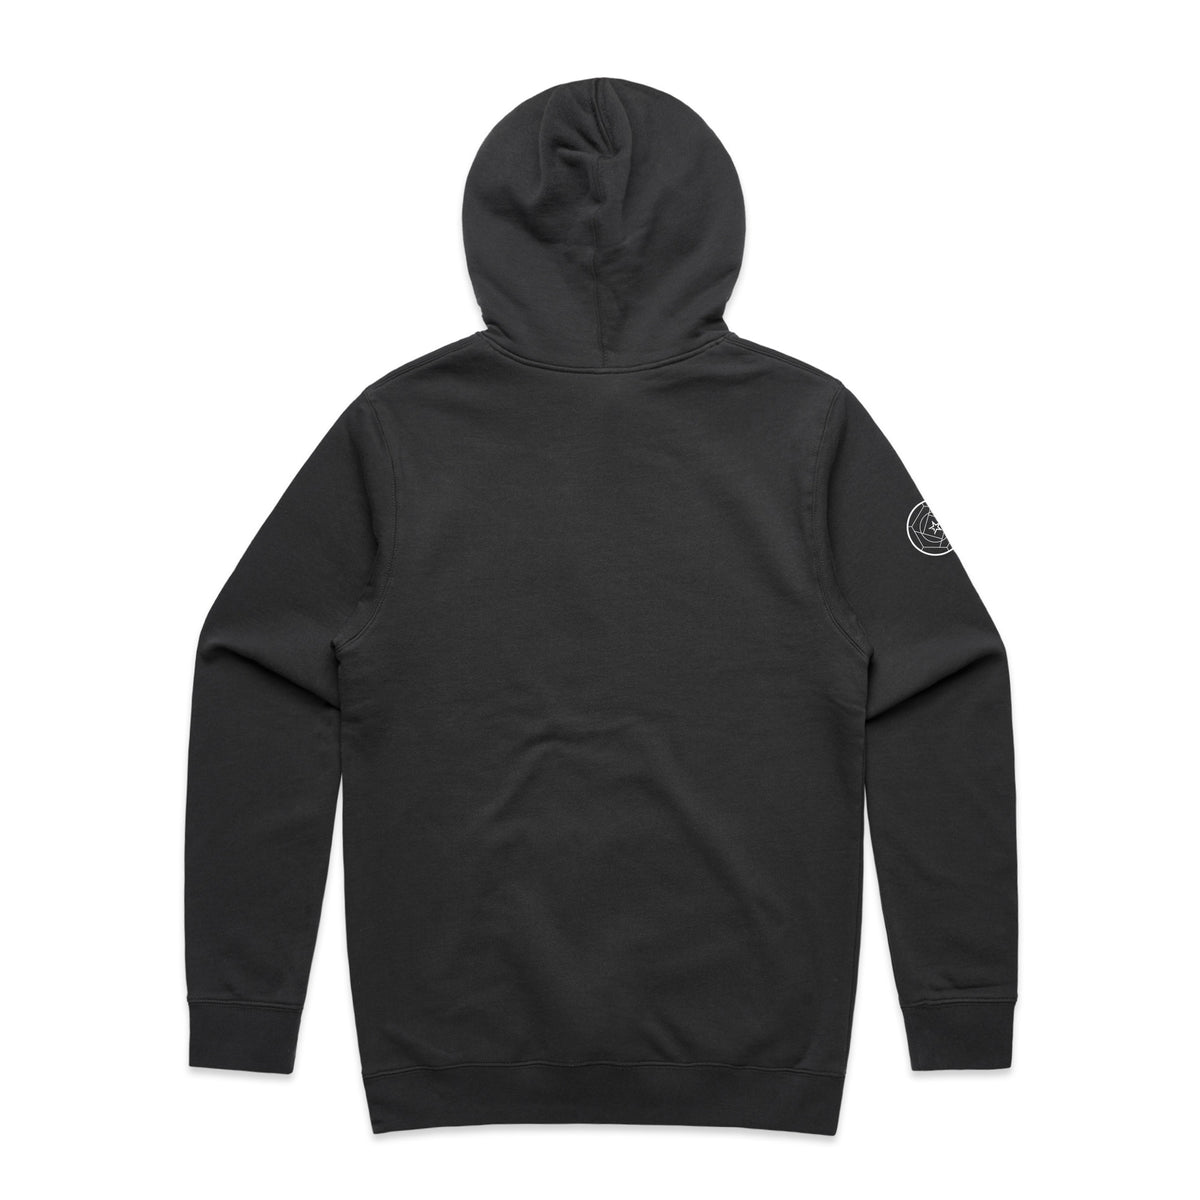 Complexity Trademarked Hoodie